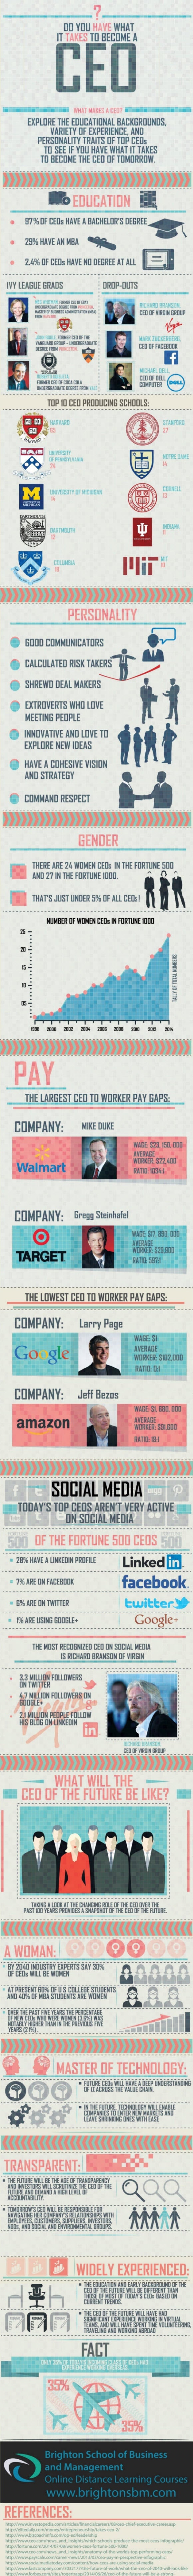 Do-you-have-what-it-takes-to-be-a-CEO-Infographic